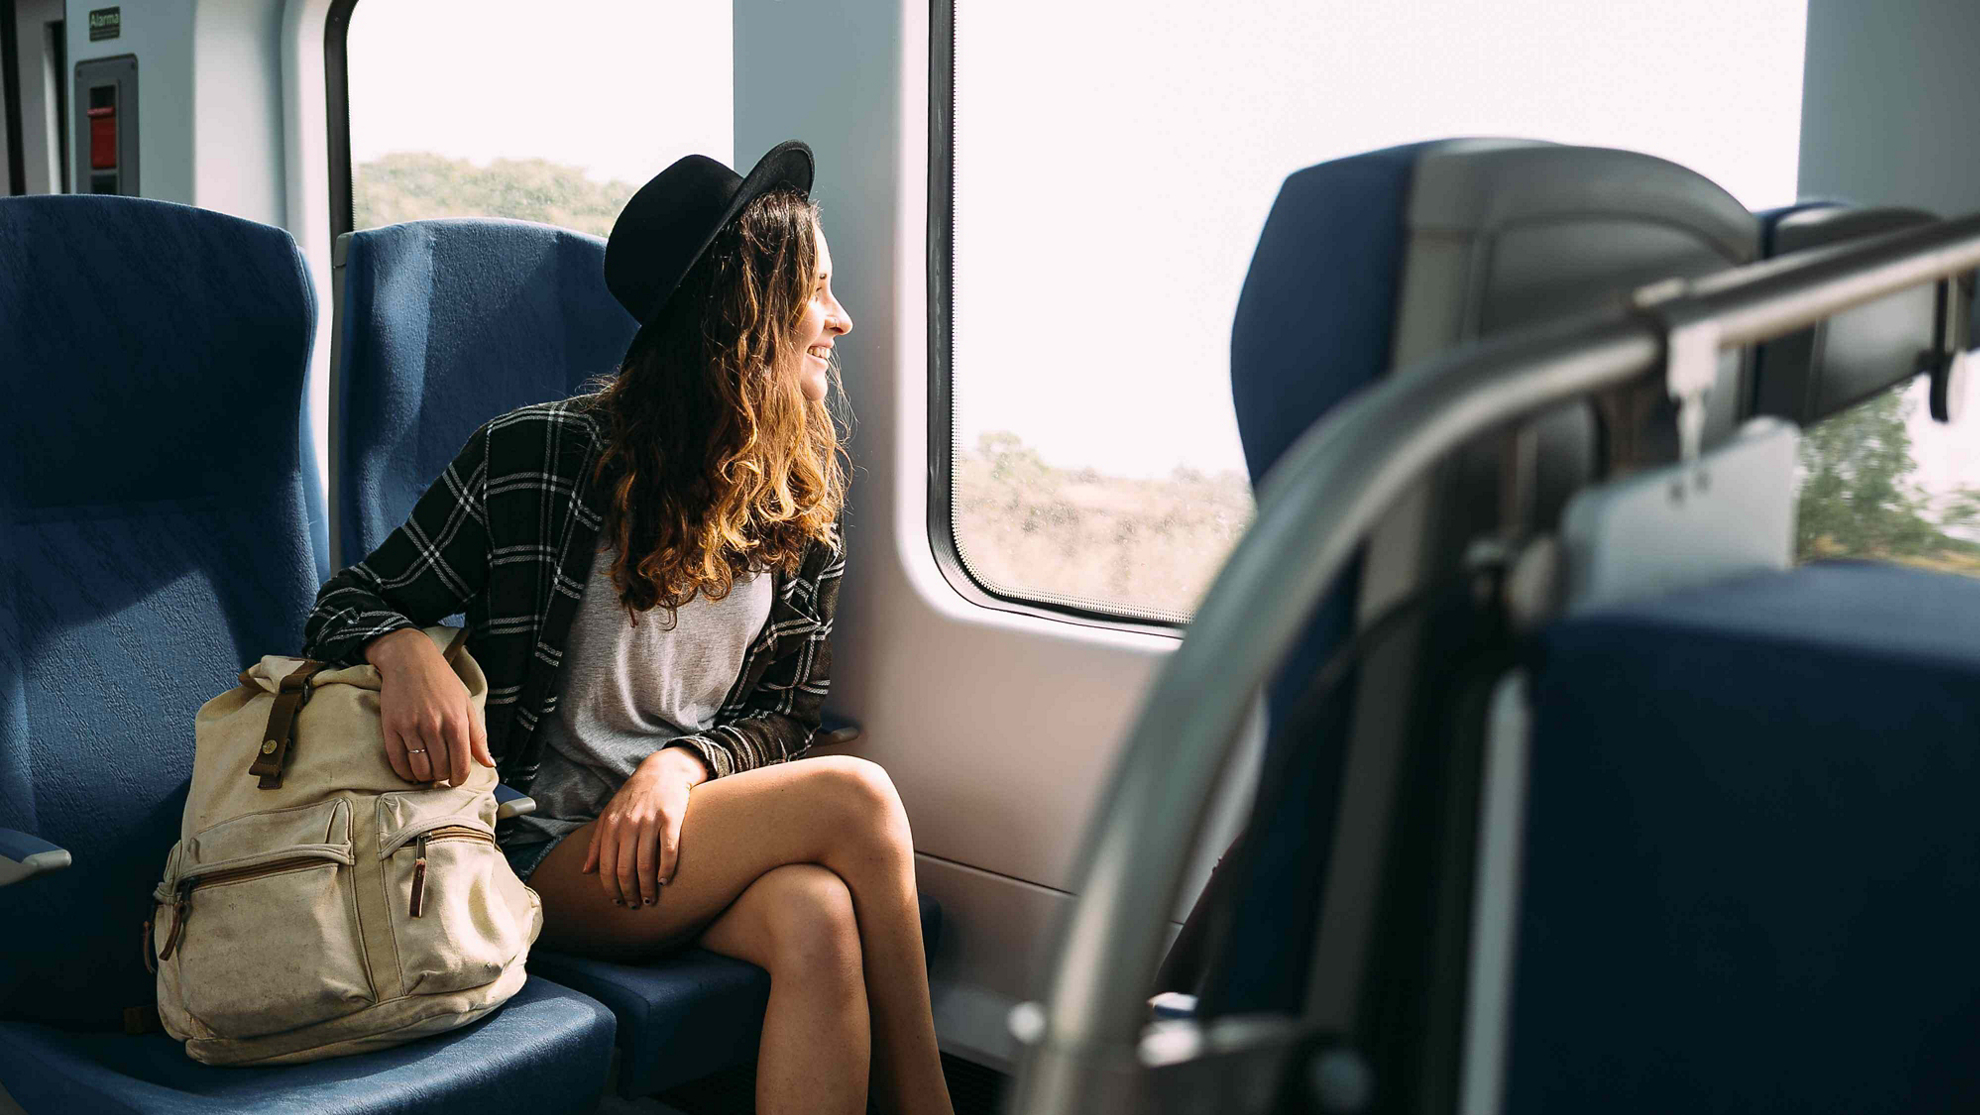 Pack your bags, it is time to enjoy solo female travel and savor some alone time